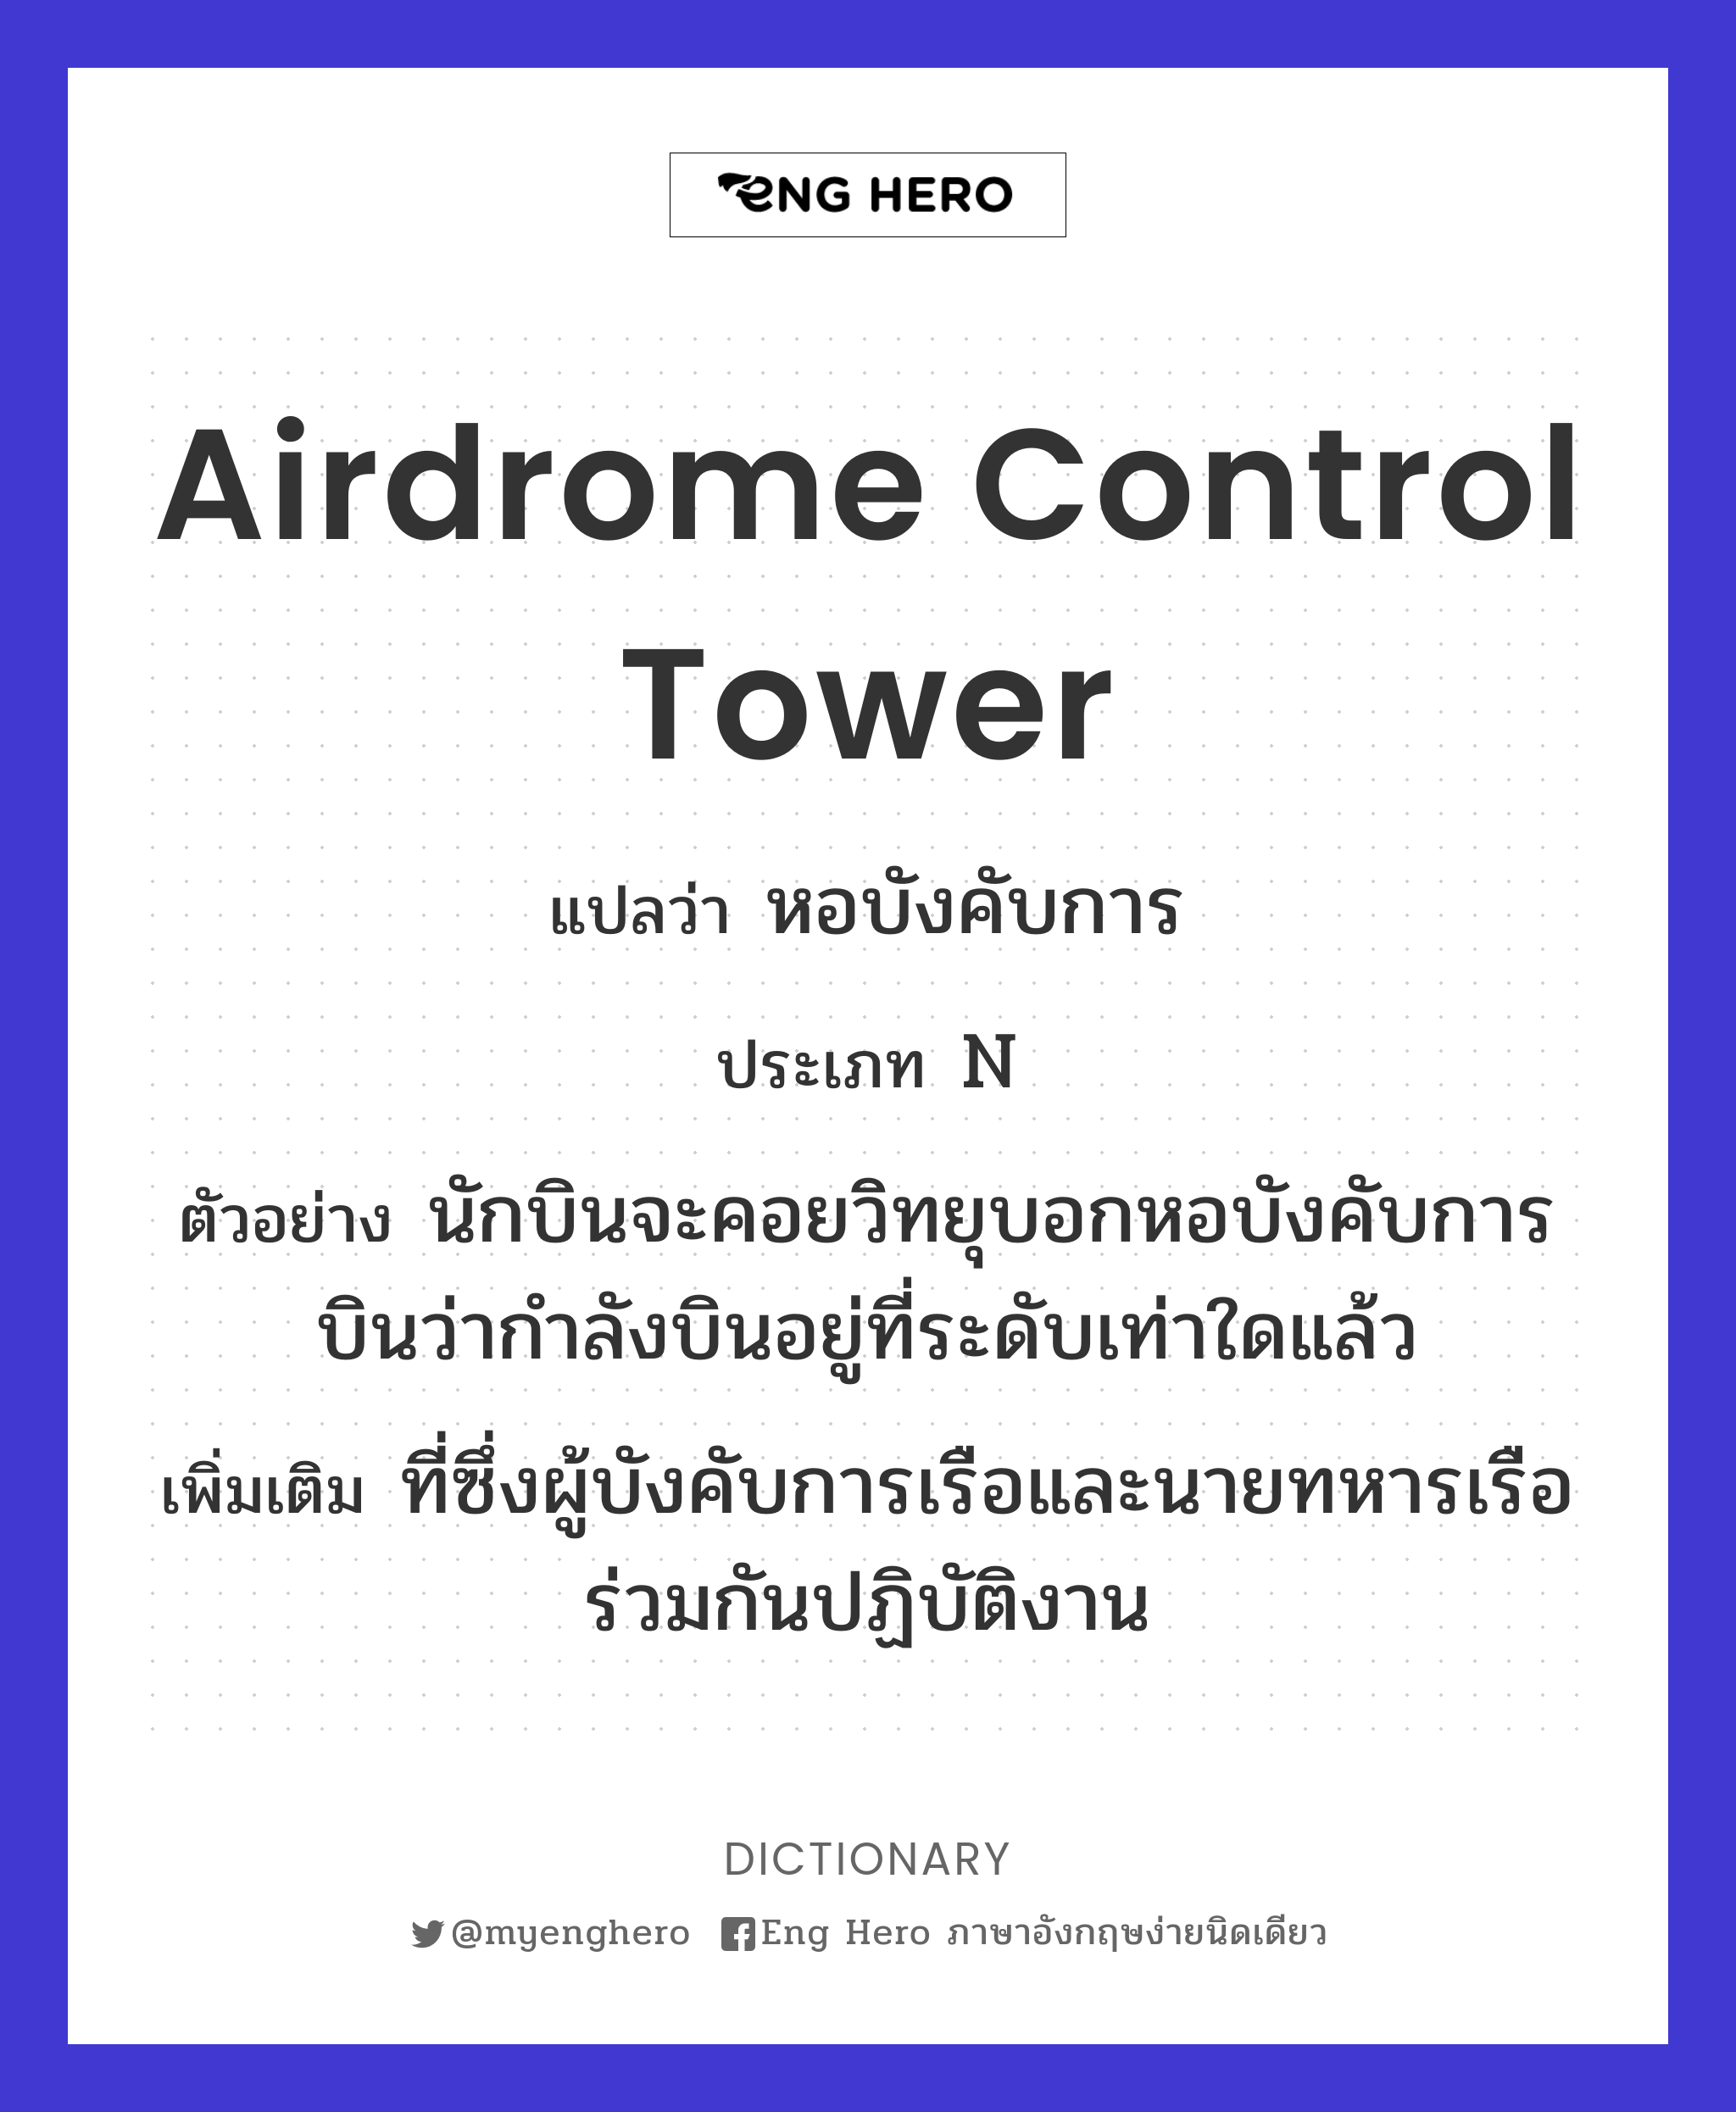 airdrome control tower